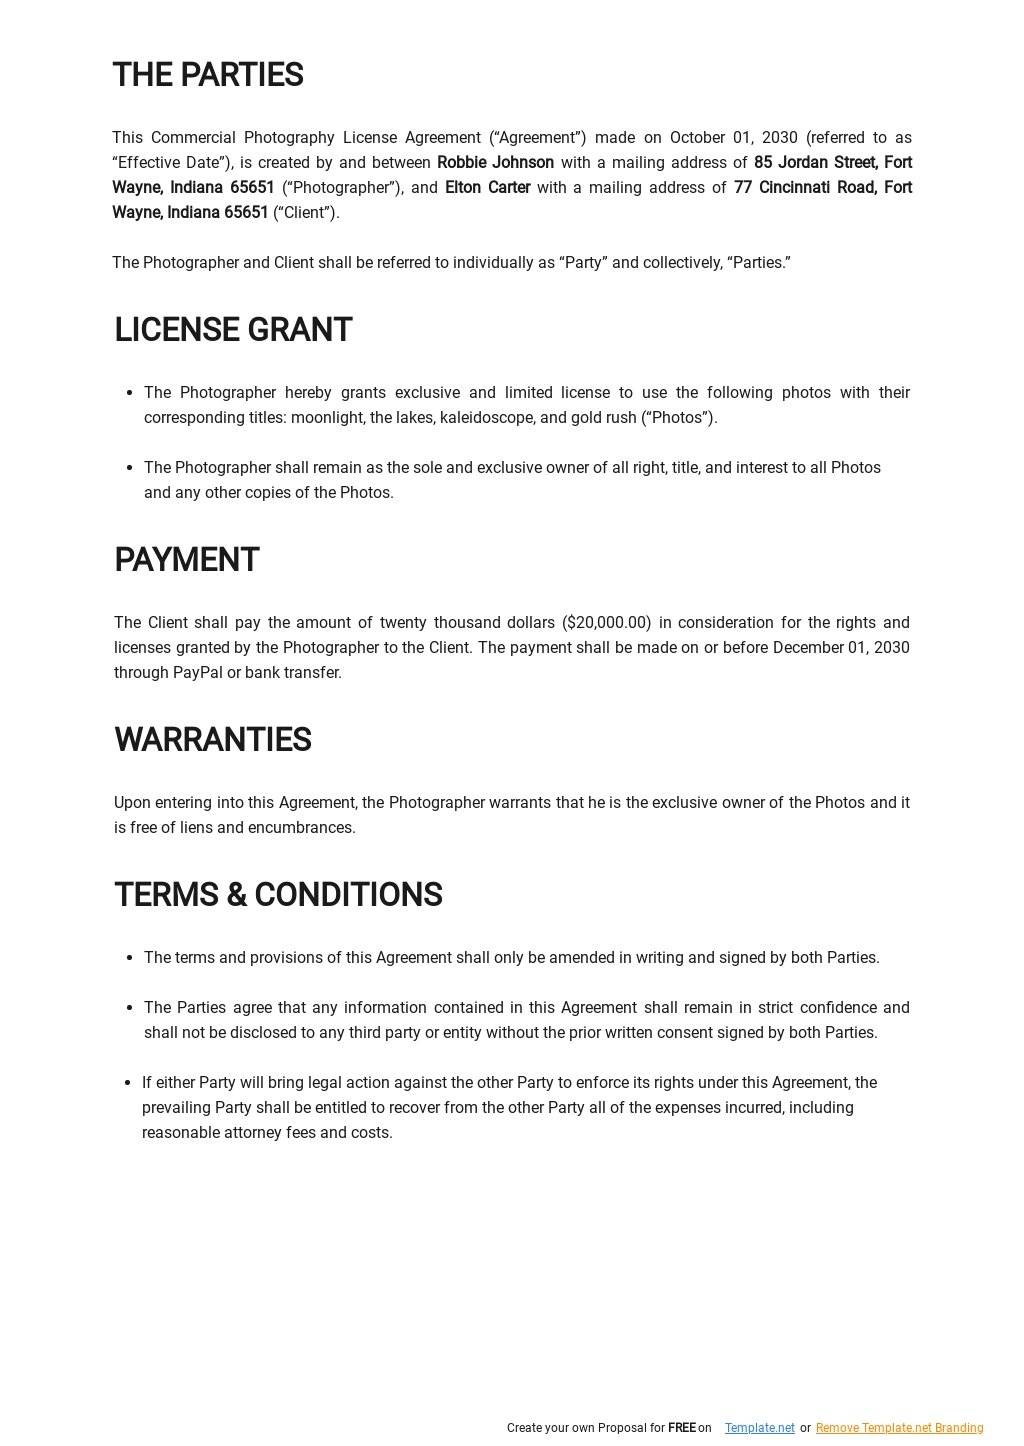 Free Commercial Photography License Agreement Template - Google For photography license agreement template